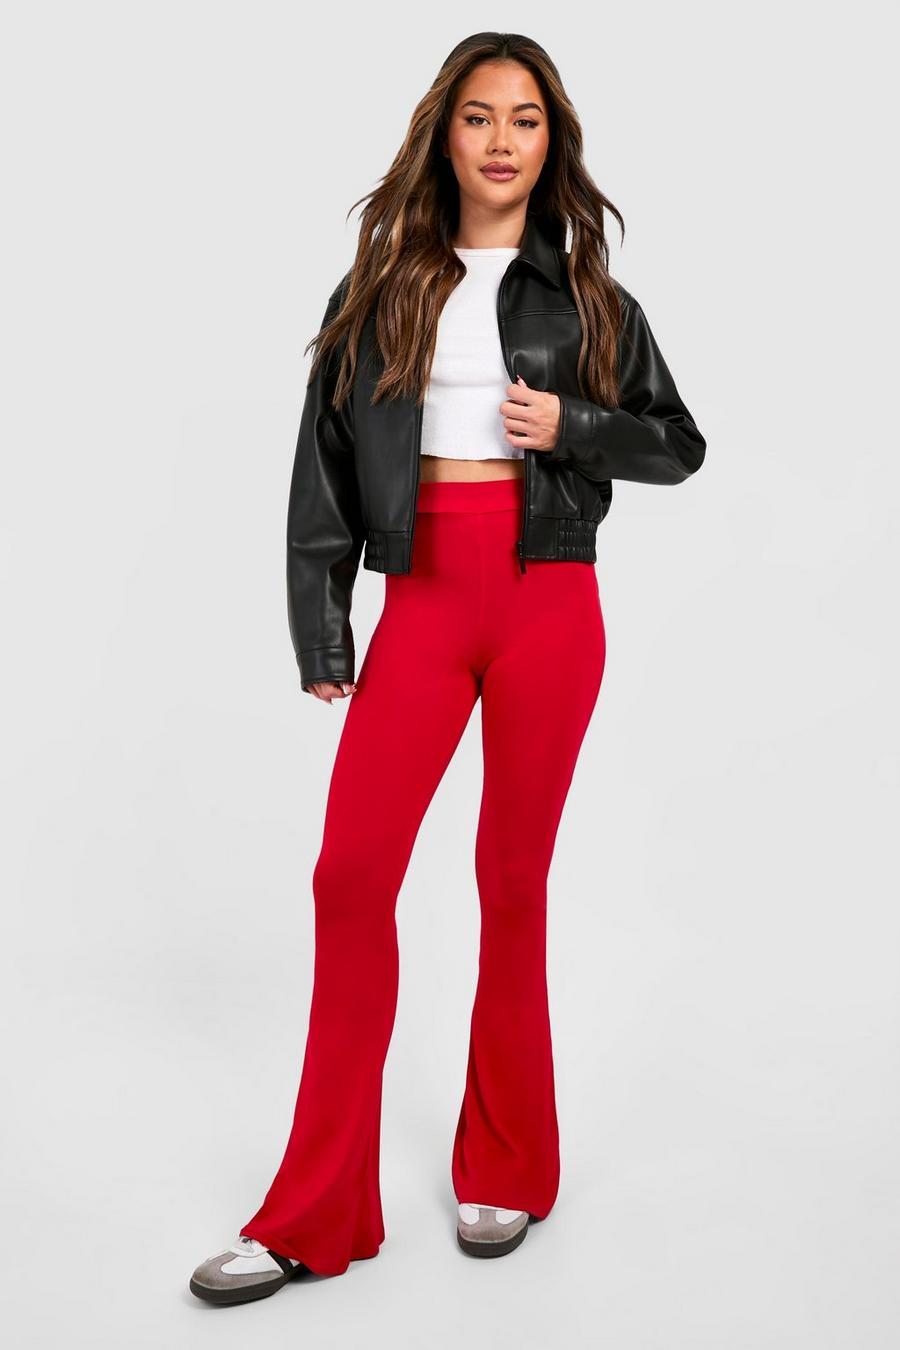 Cherry Red High Waist Basic Fit & Flare Pants